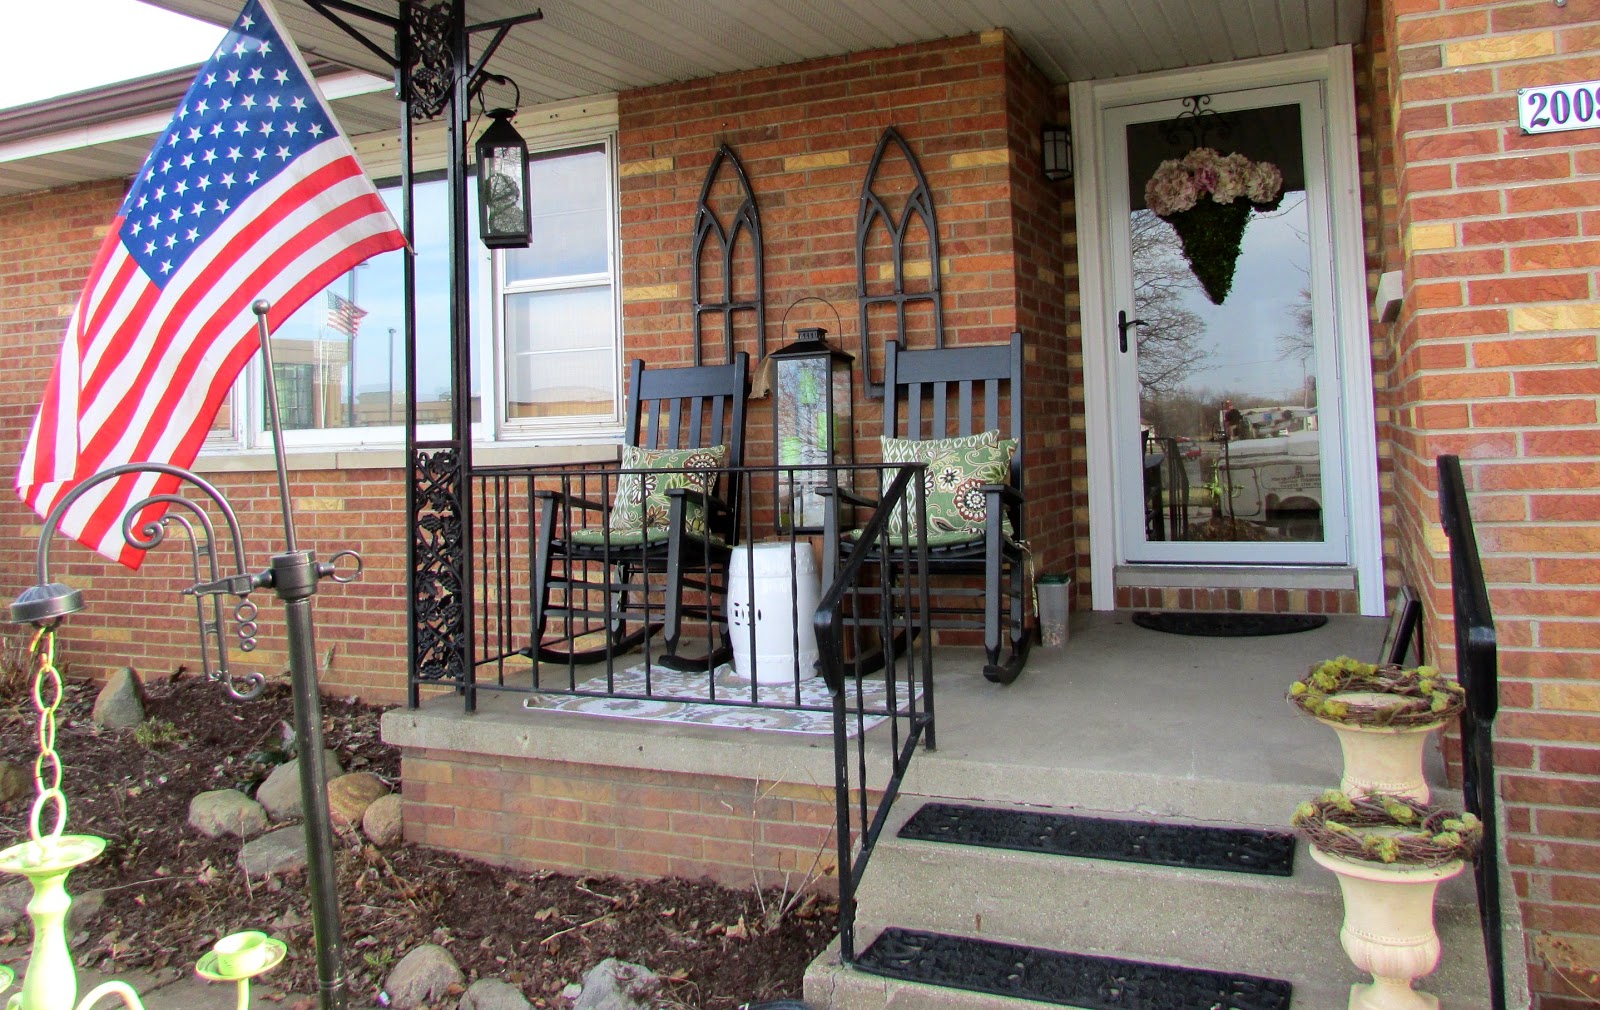 Decorating a small front porch for the spring season.